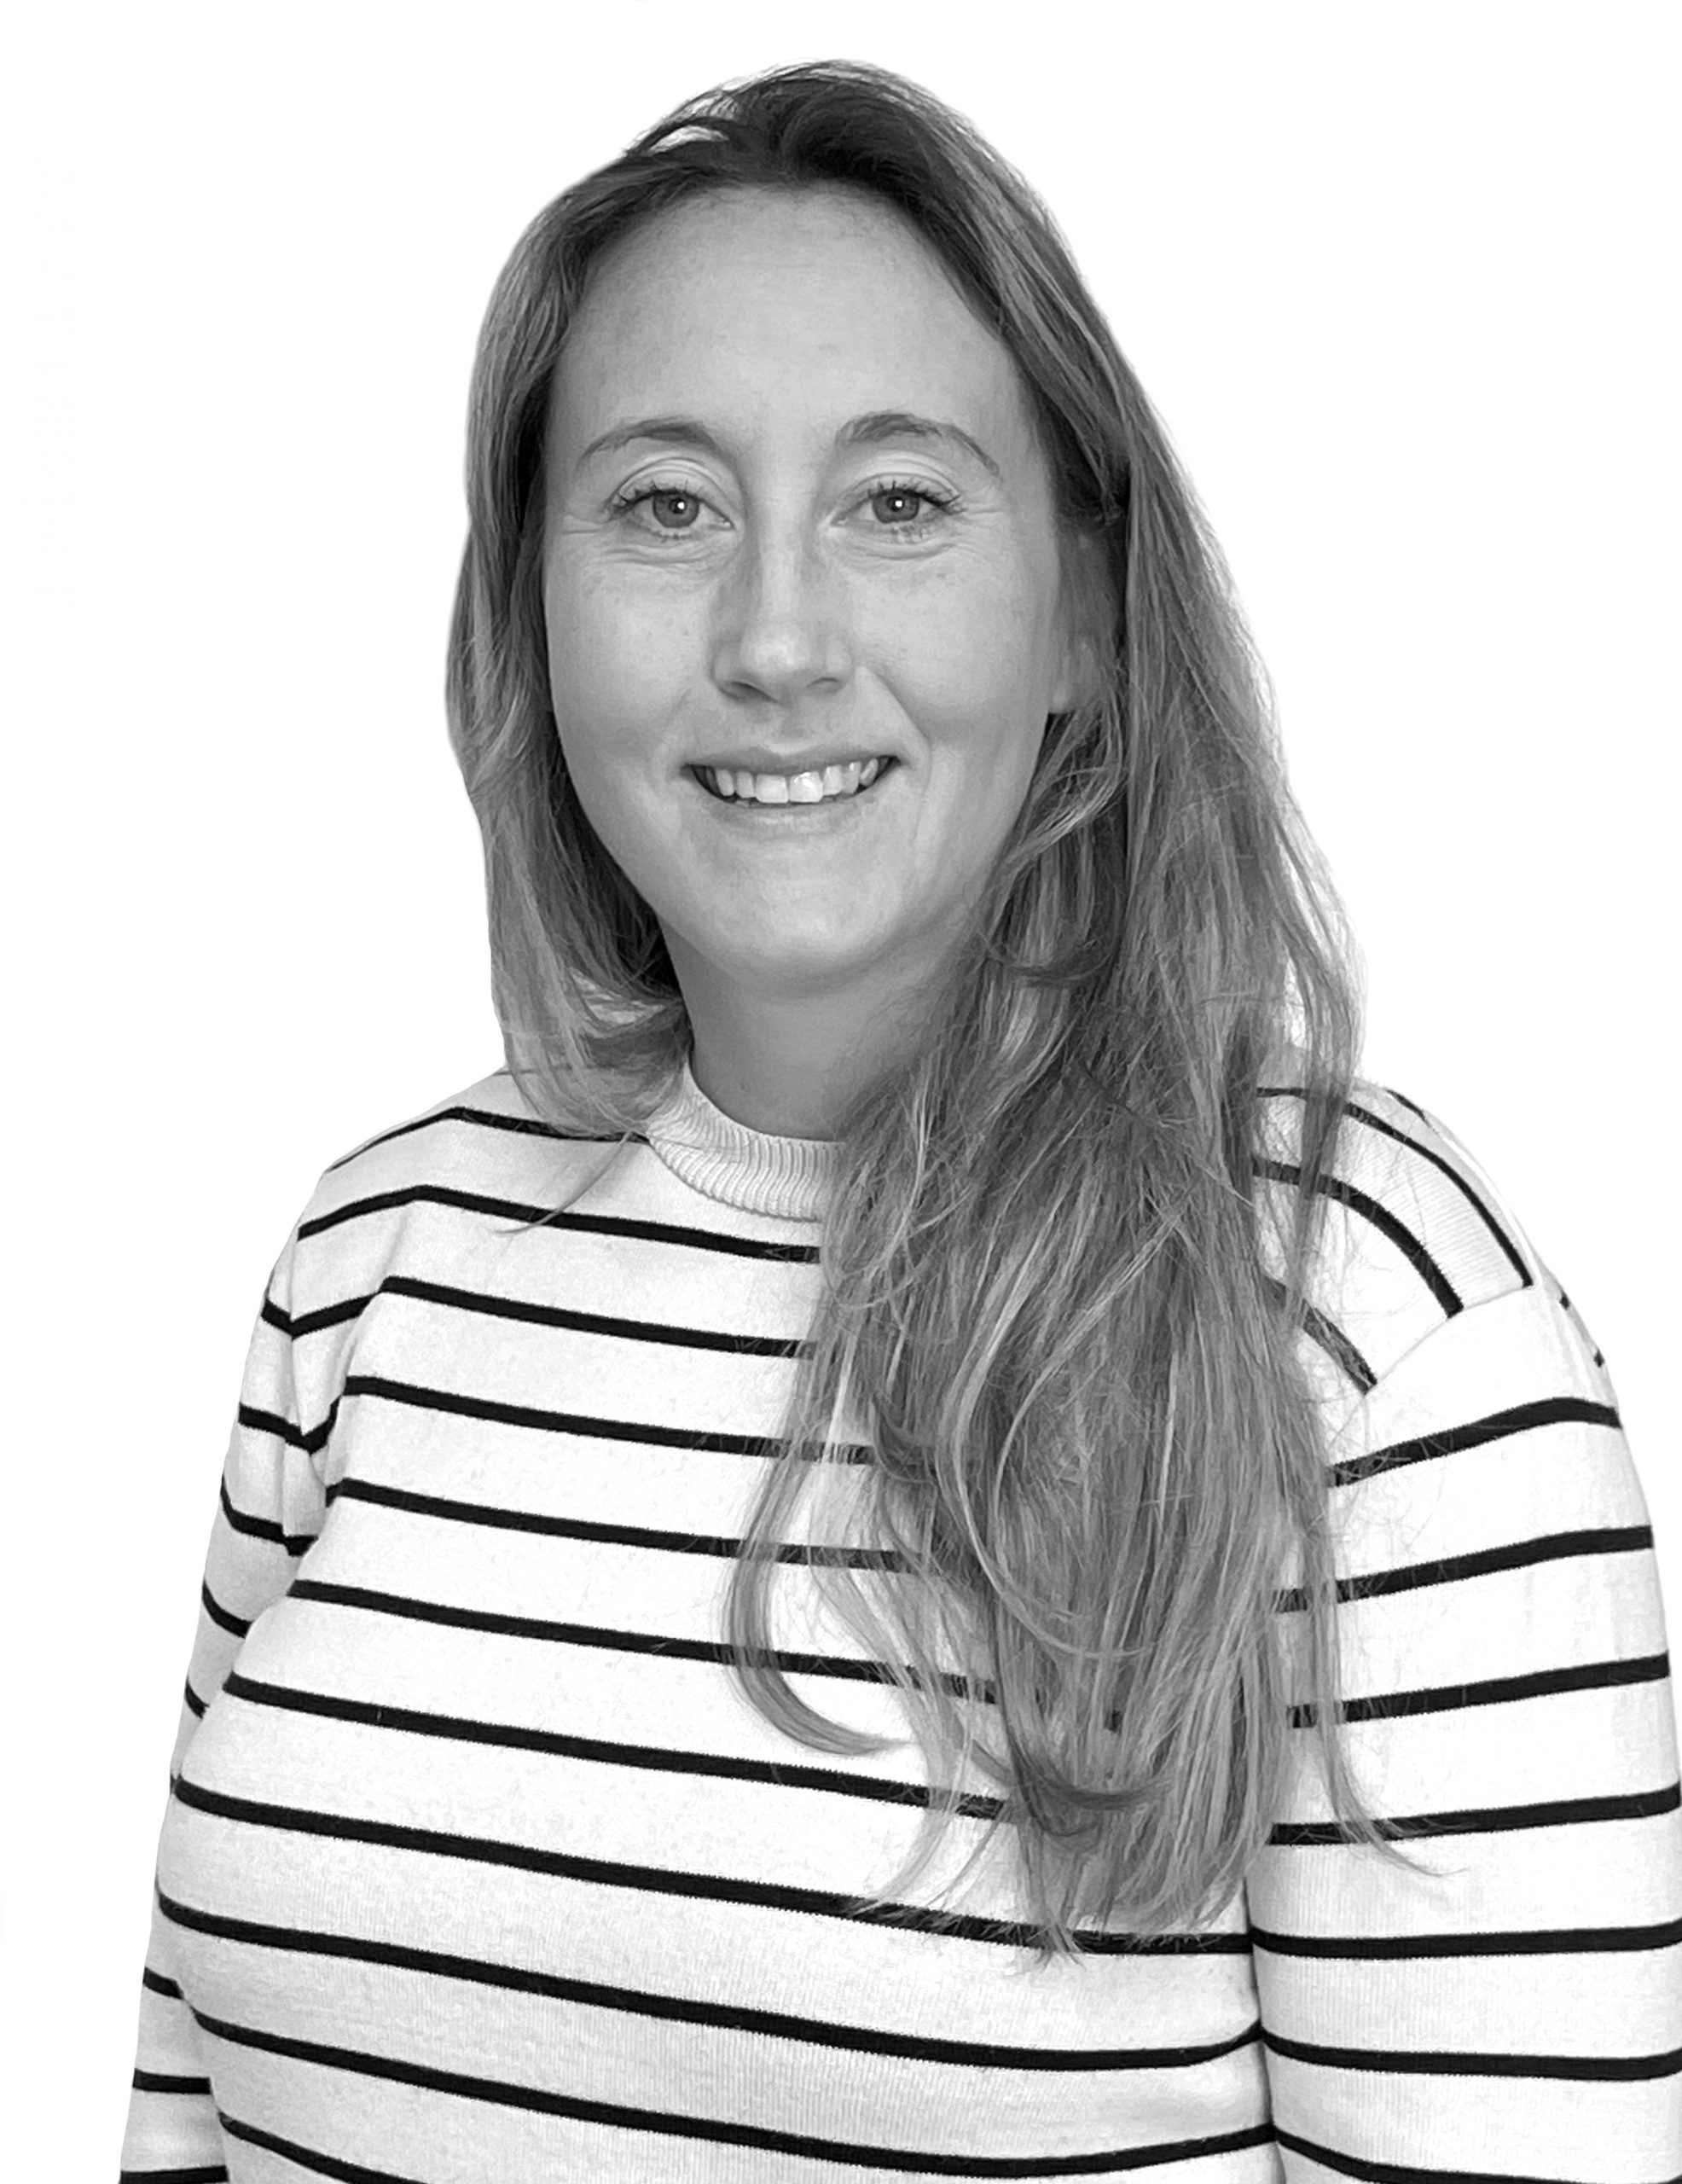 Welcoming Amy Jones to the Property Services Team